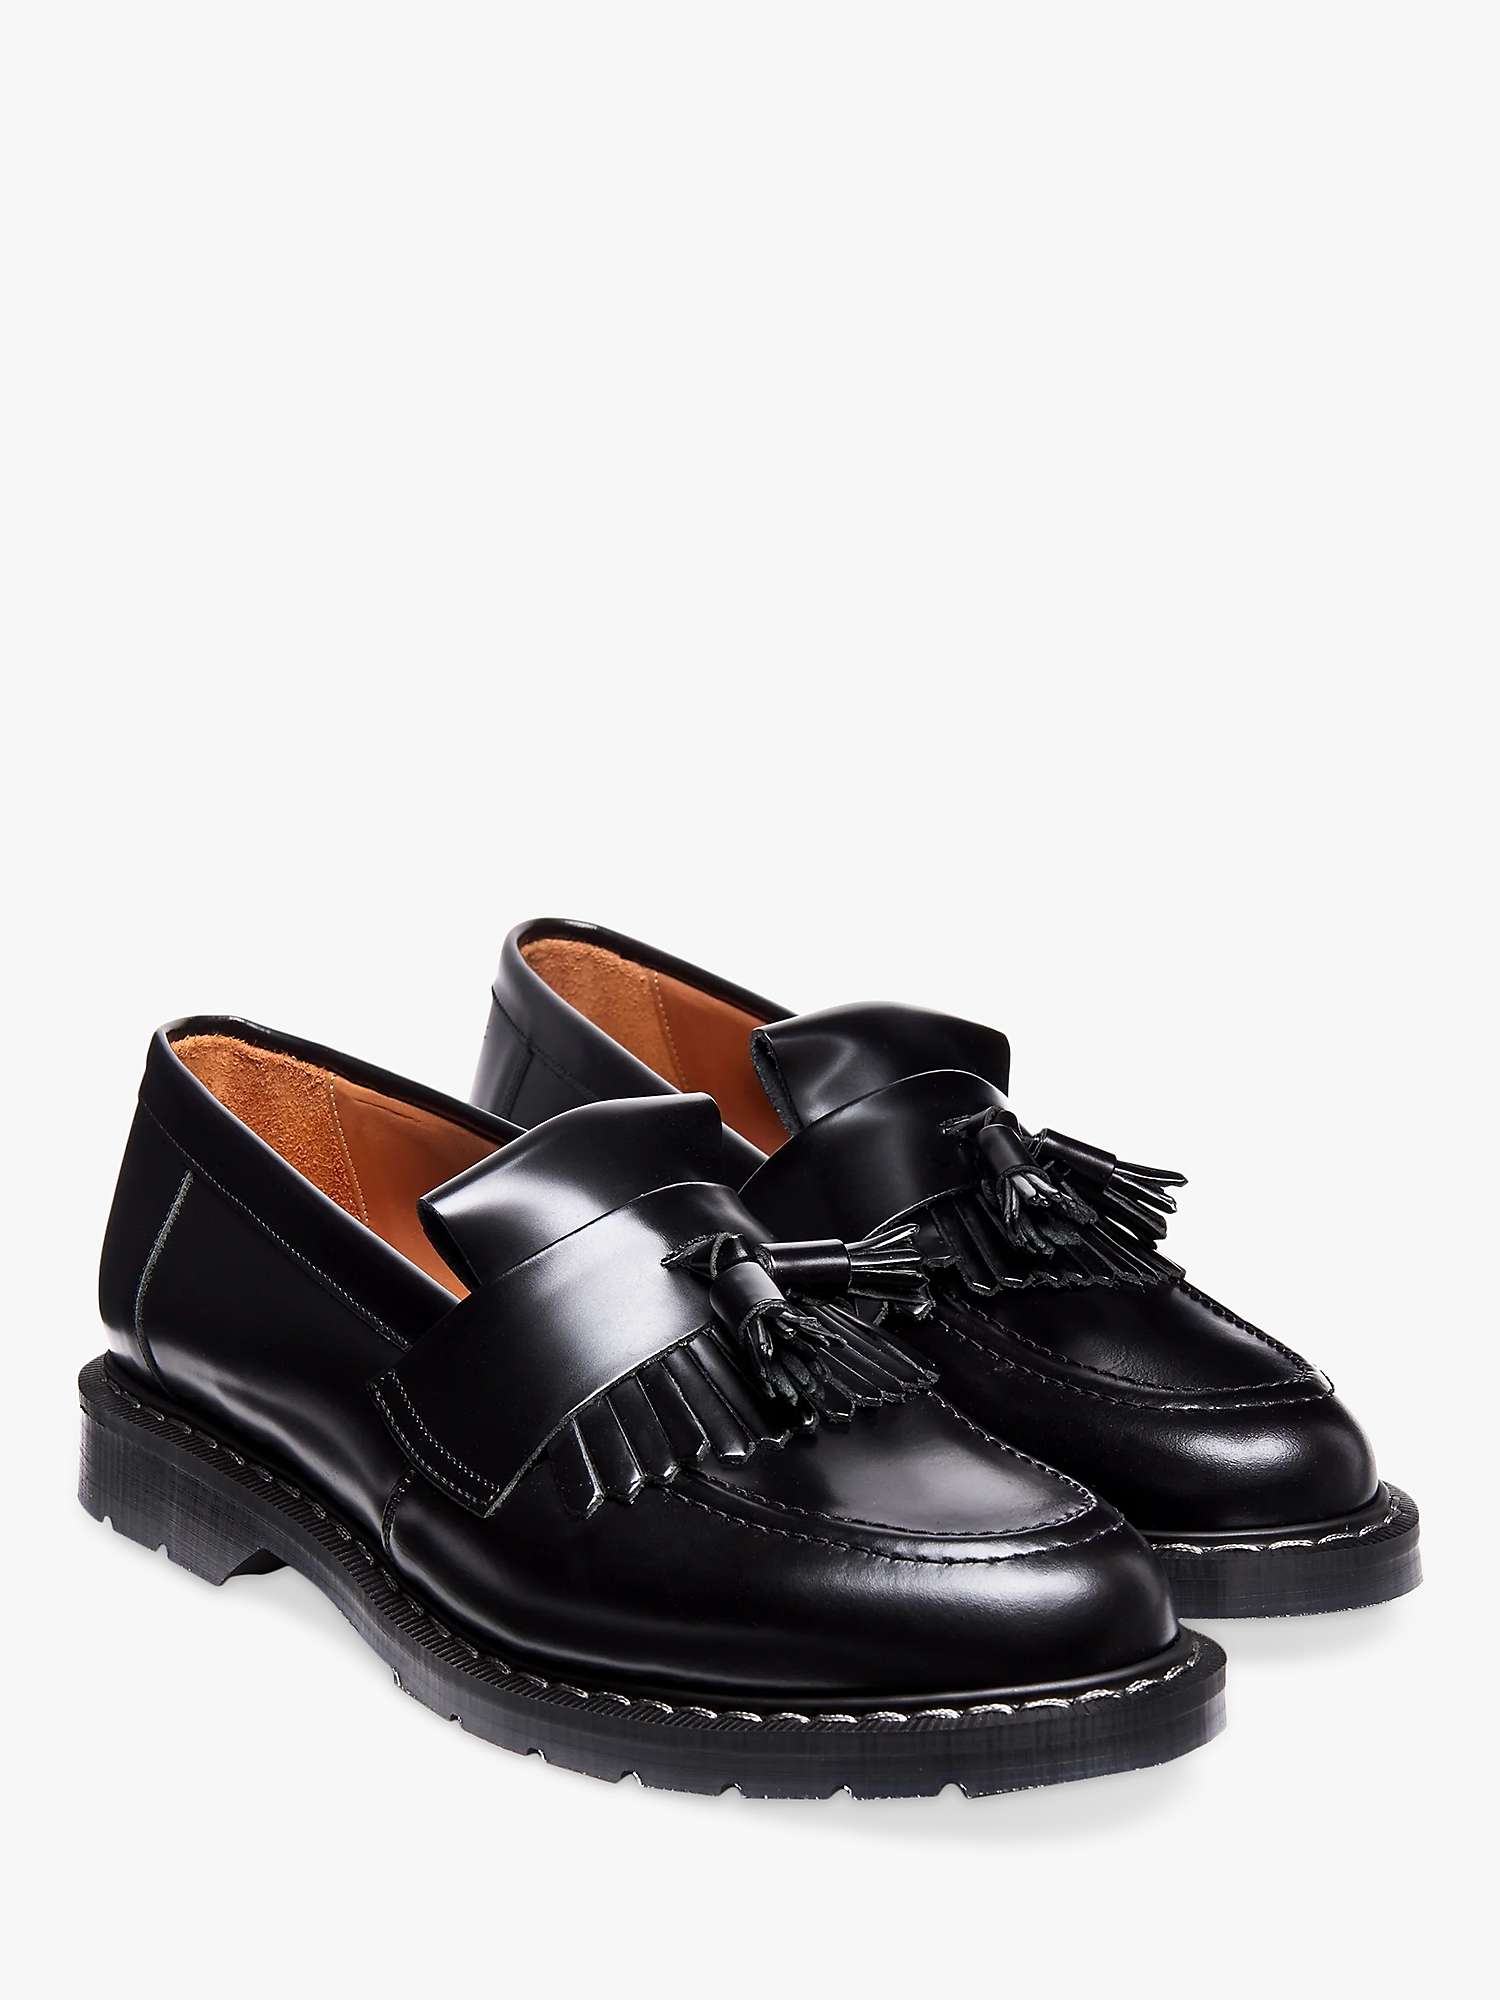 Buy Solovair Tassle Leather Loafers Online at johnlewis.com